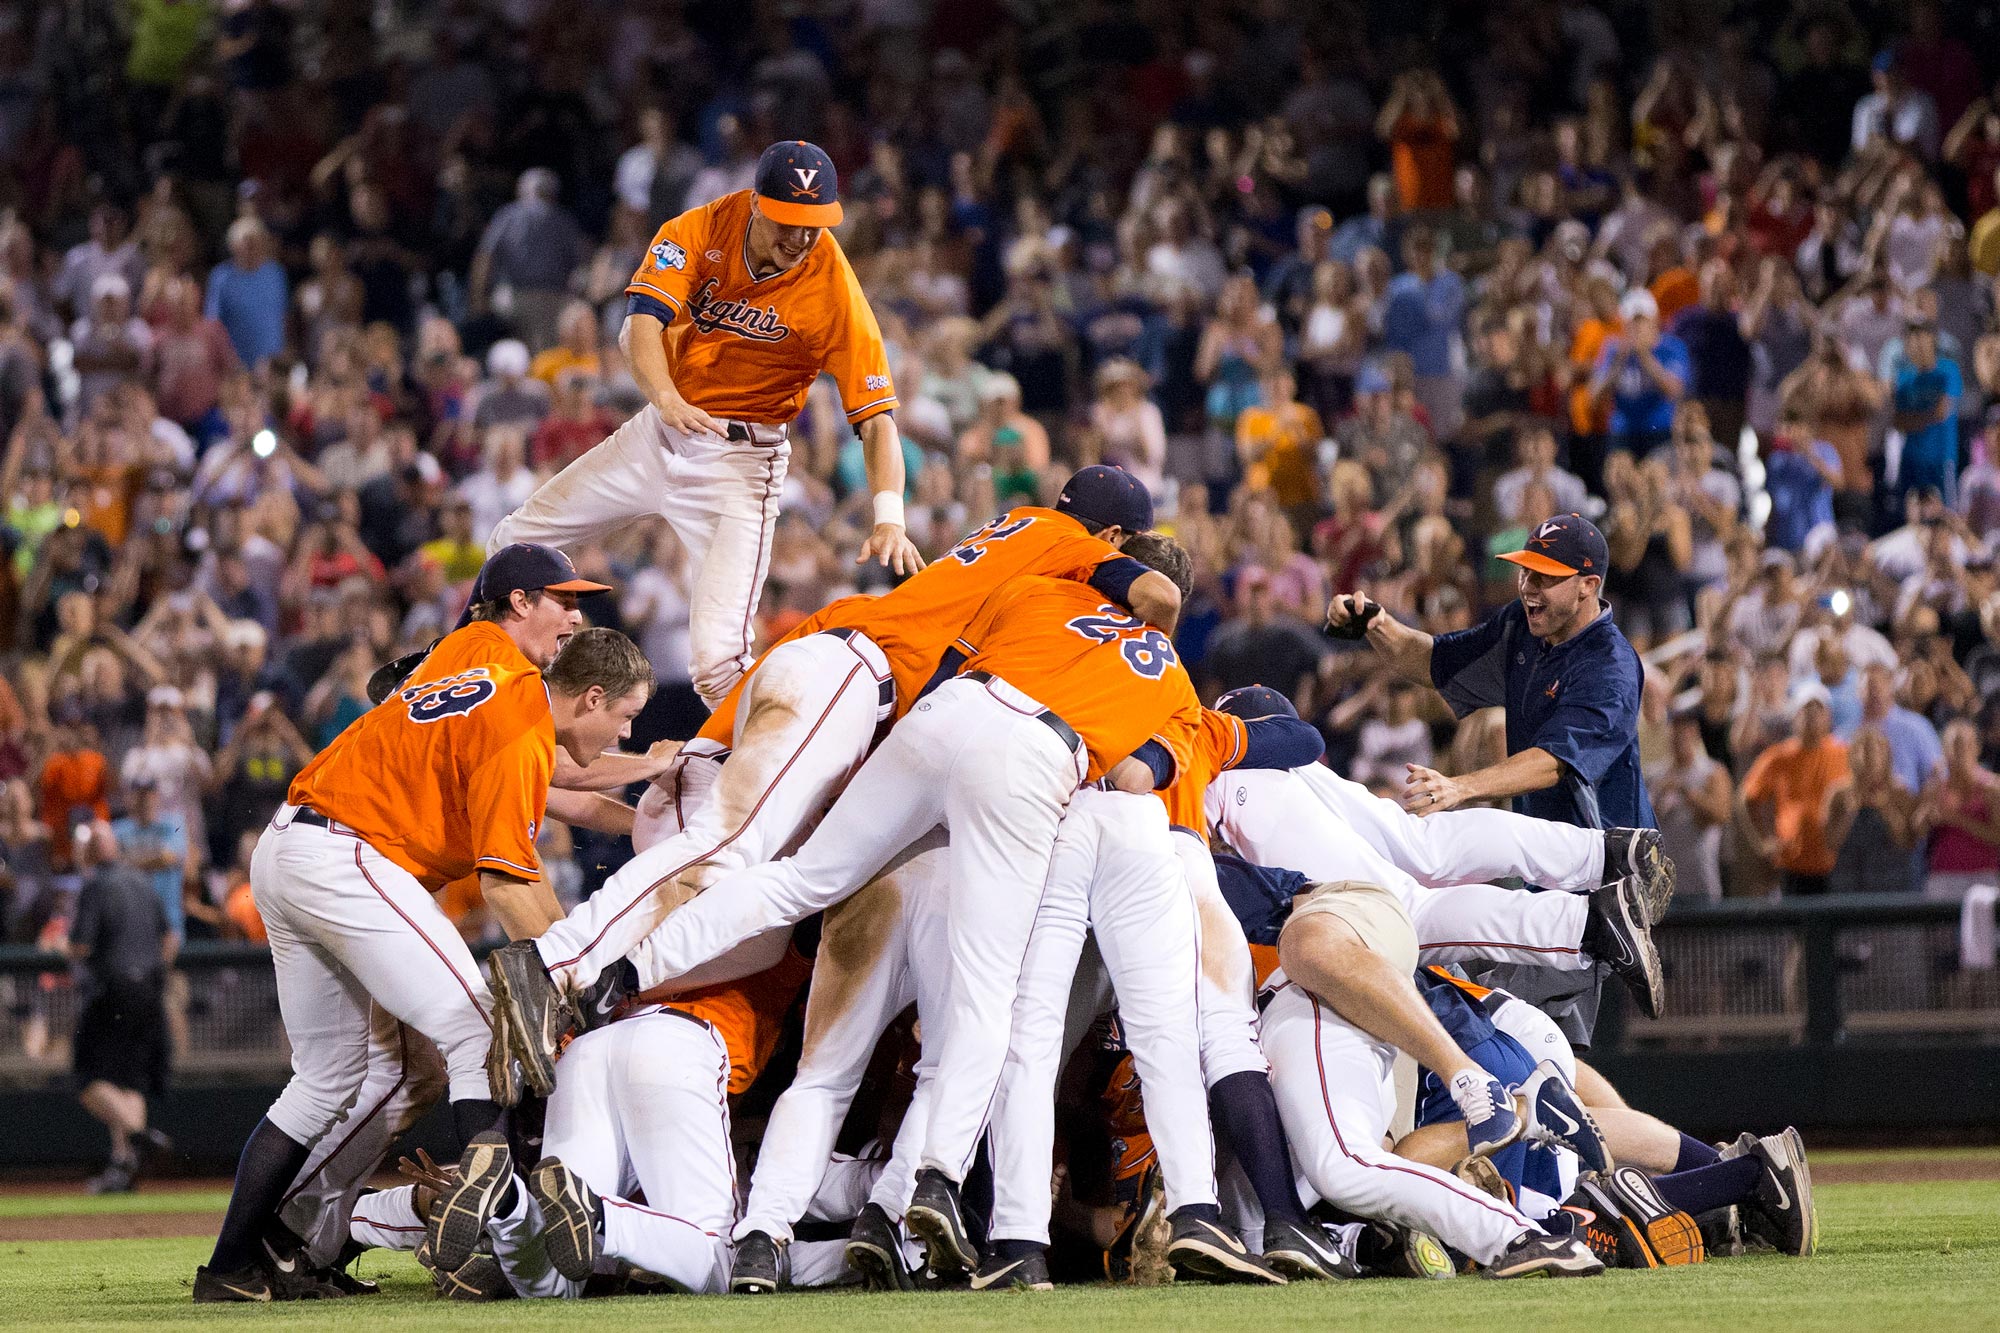 UVA baseball team create a pile on on the field after victory